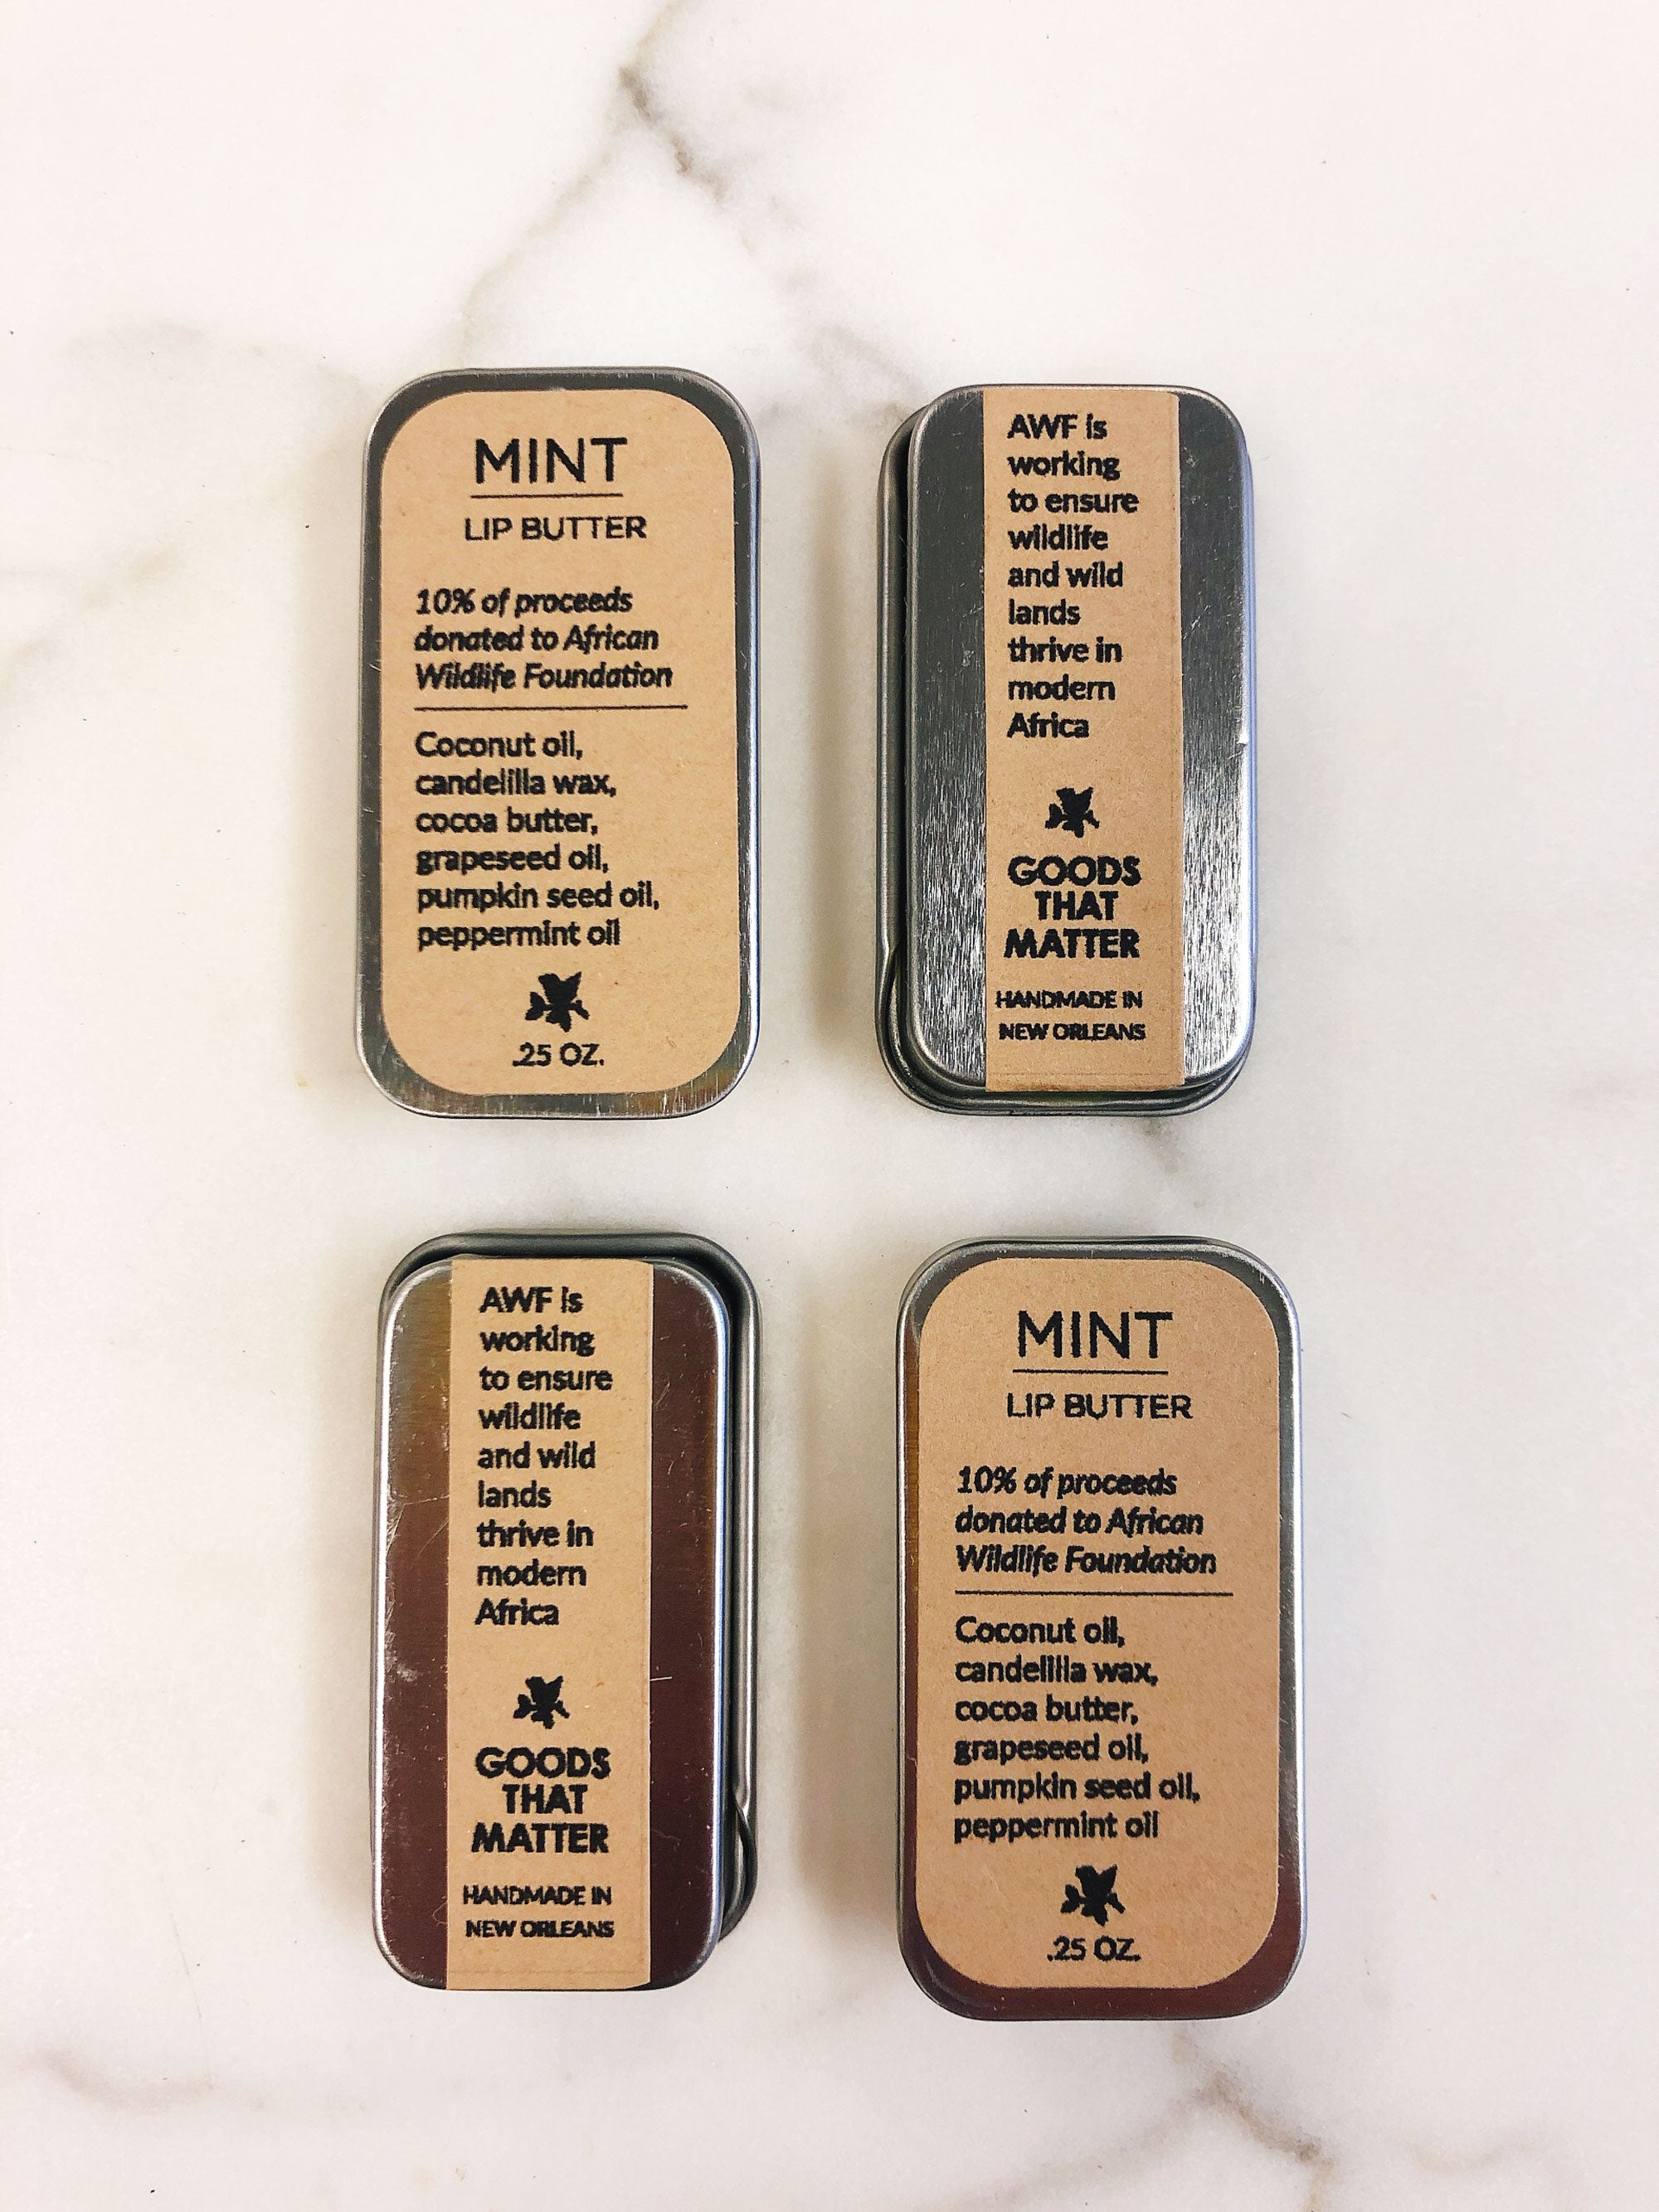 MINT Lip Butter - Vegan, gives to African Wildlife Foundation